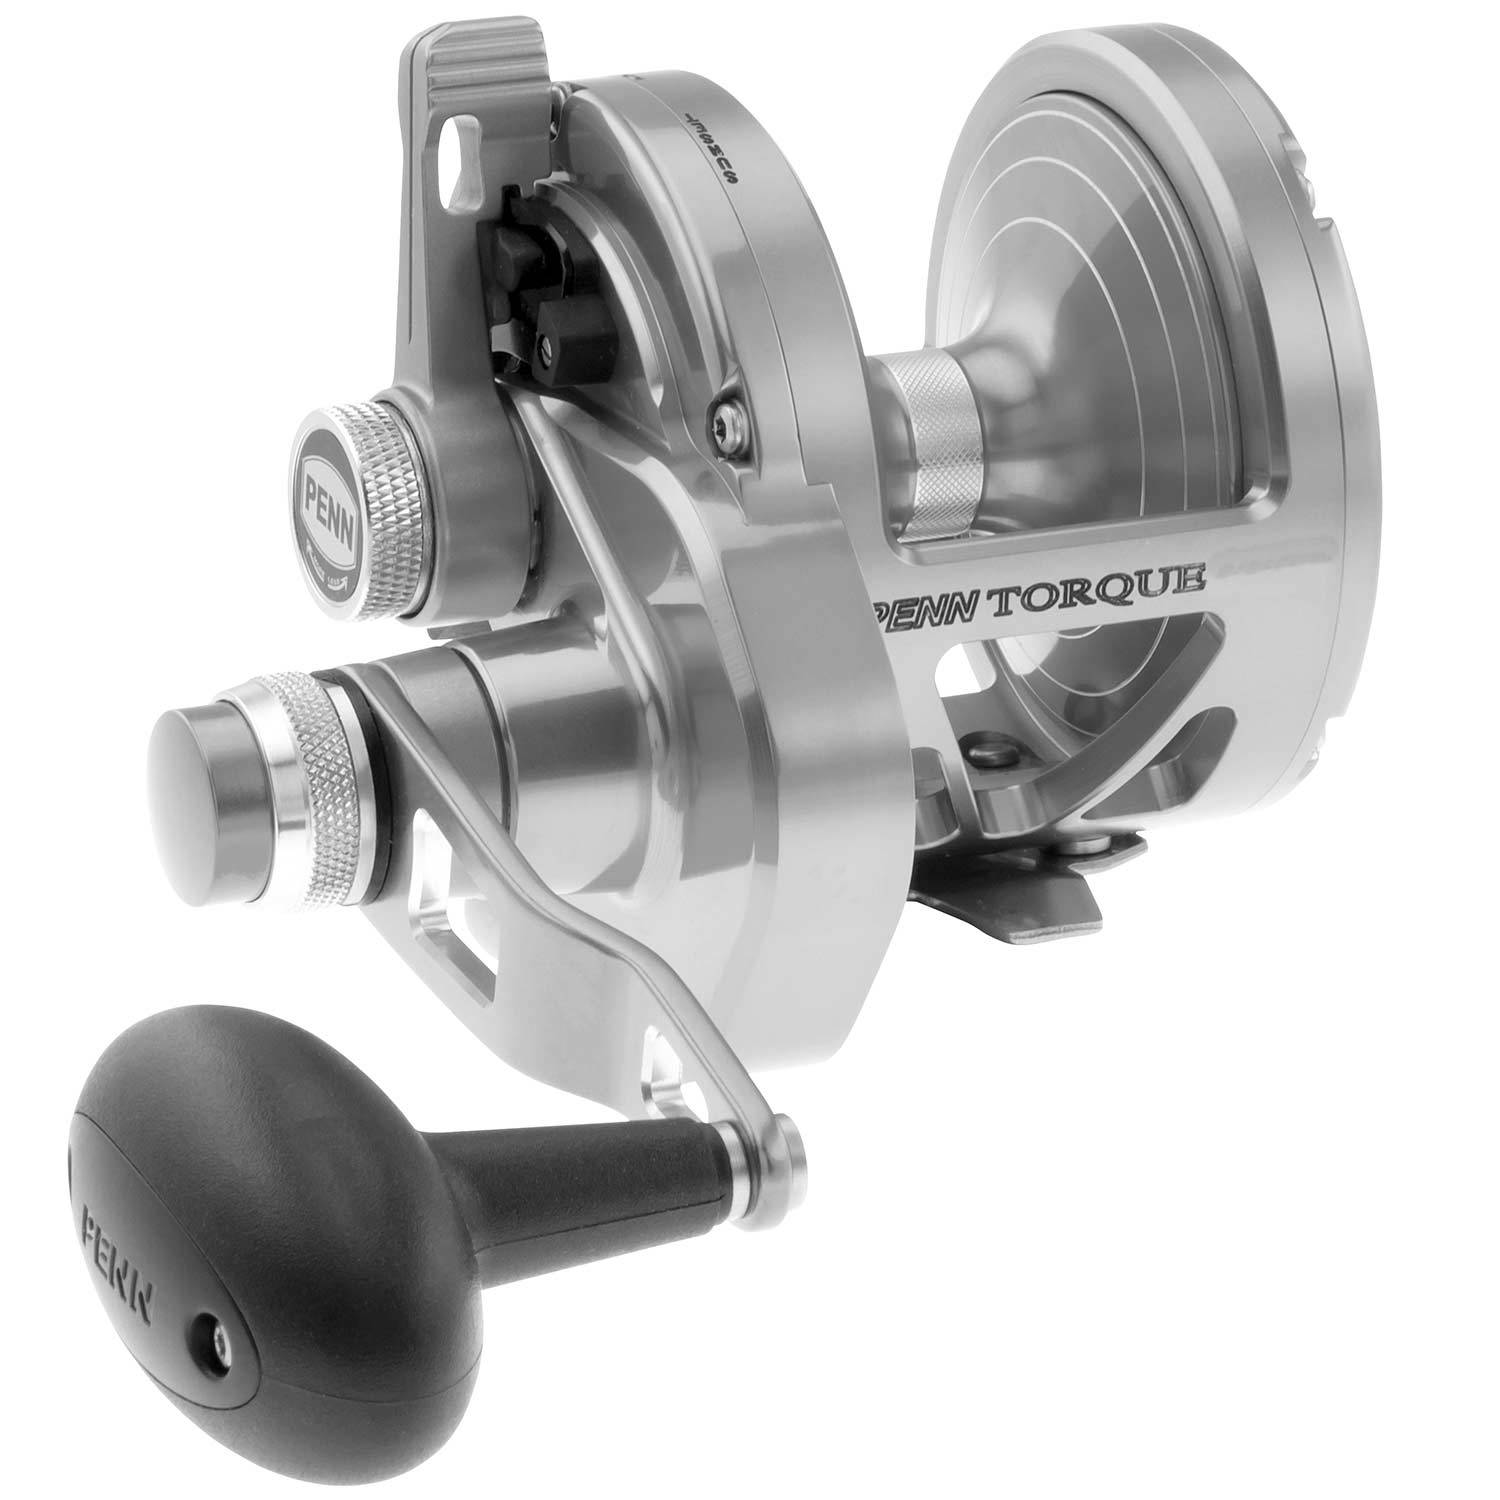 CAMEKOON Lever Drag Two Speed 4.5:1/2.1:1 Conventional Reel Sea